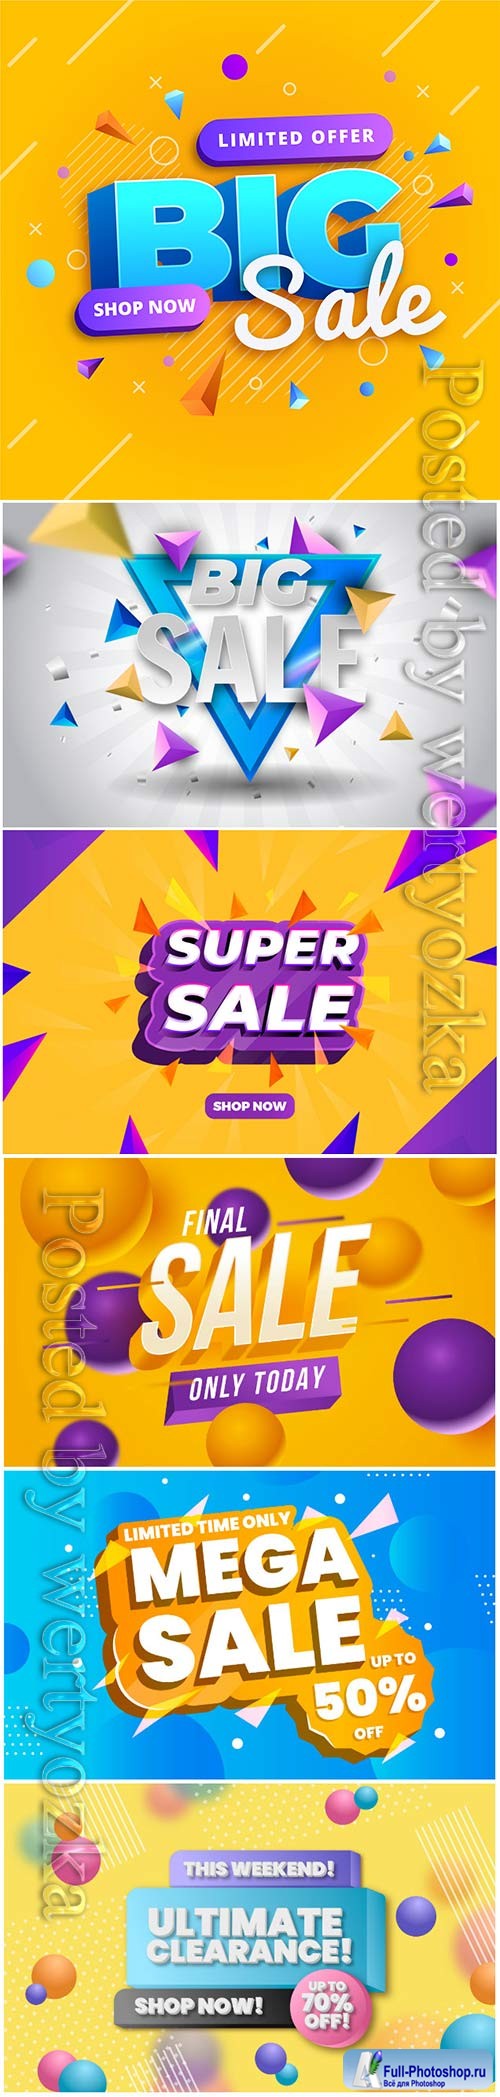 Colorful 3d sales vector background # 5